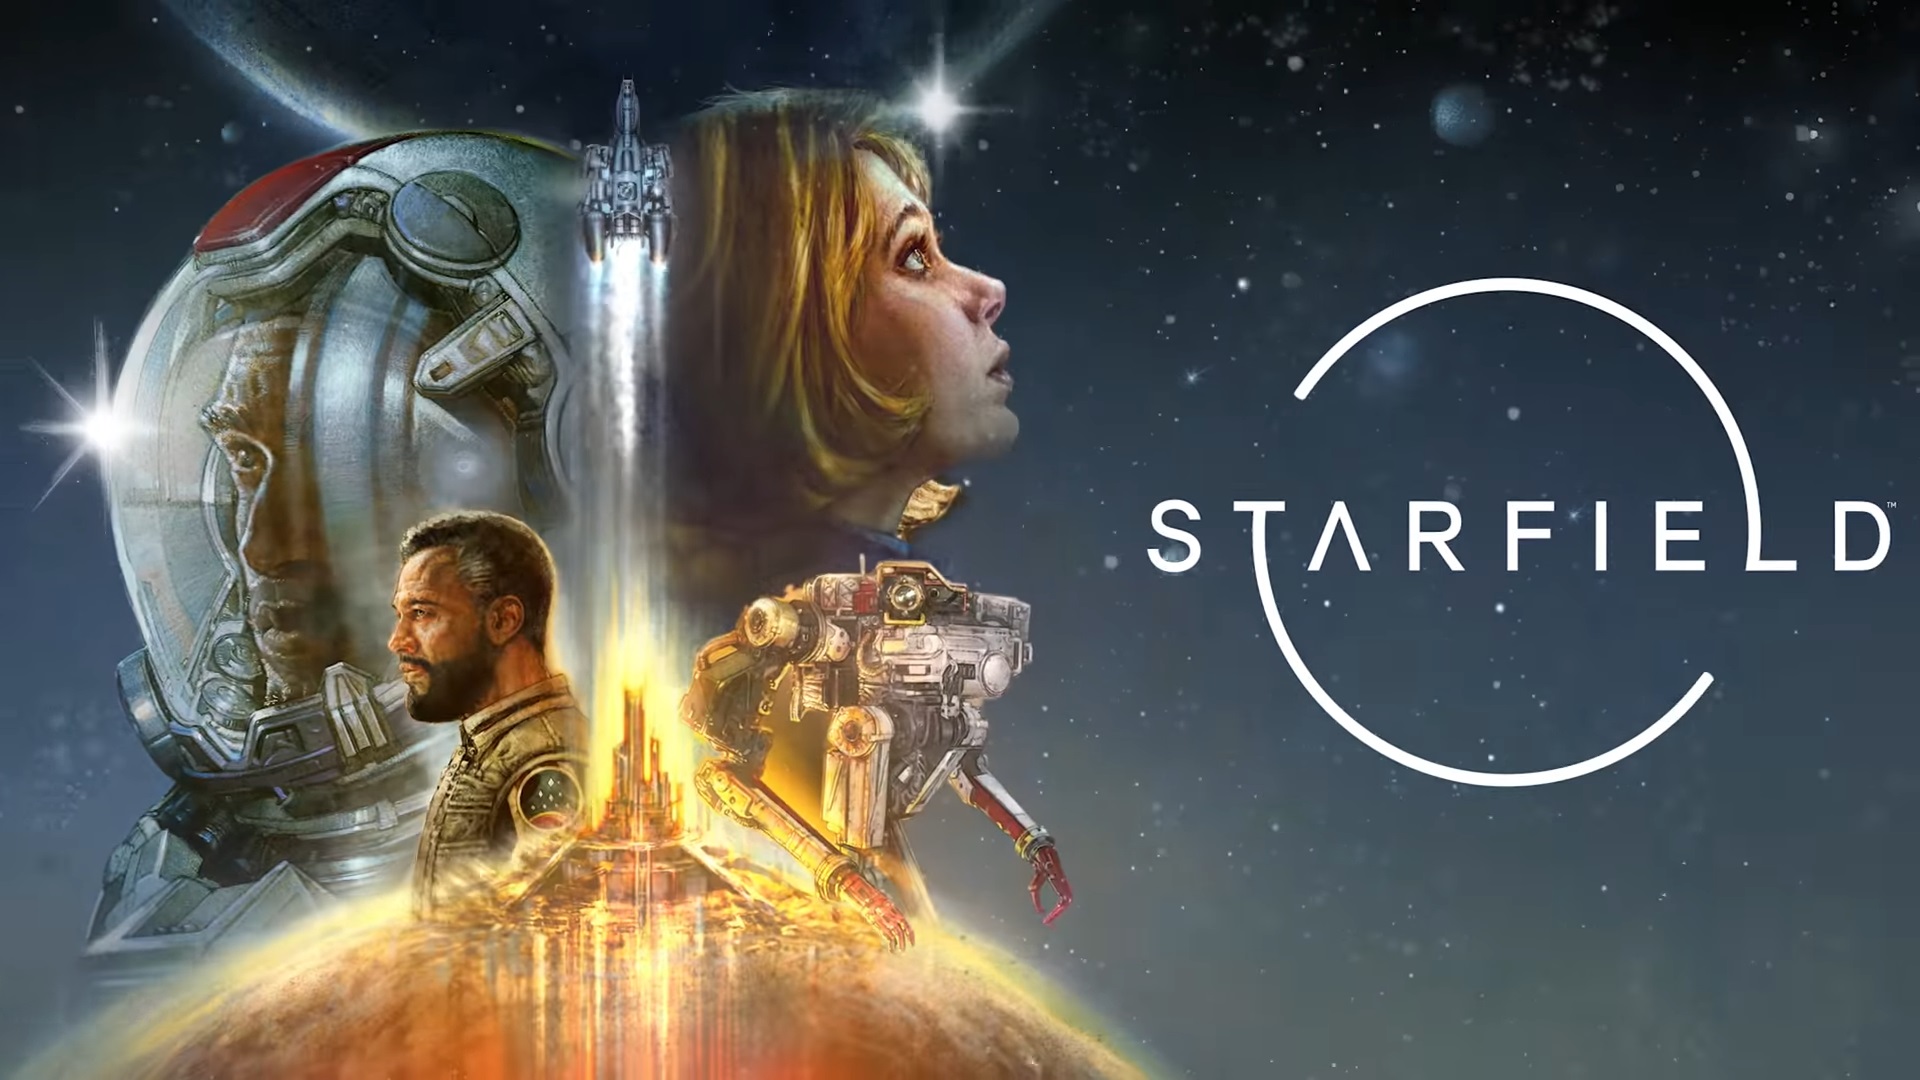 Starfield Torrent Free Download (Repack) Full Version For PC